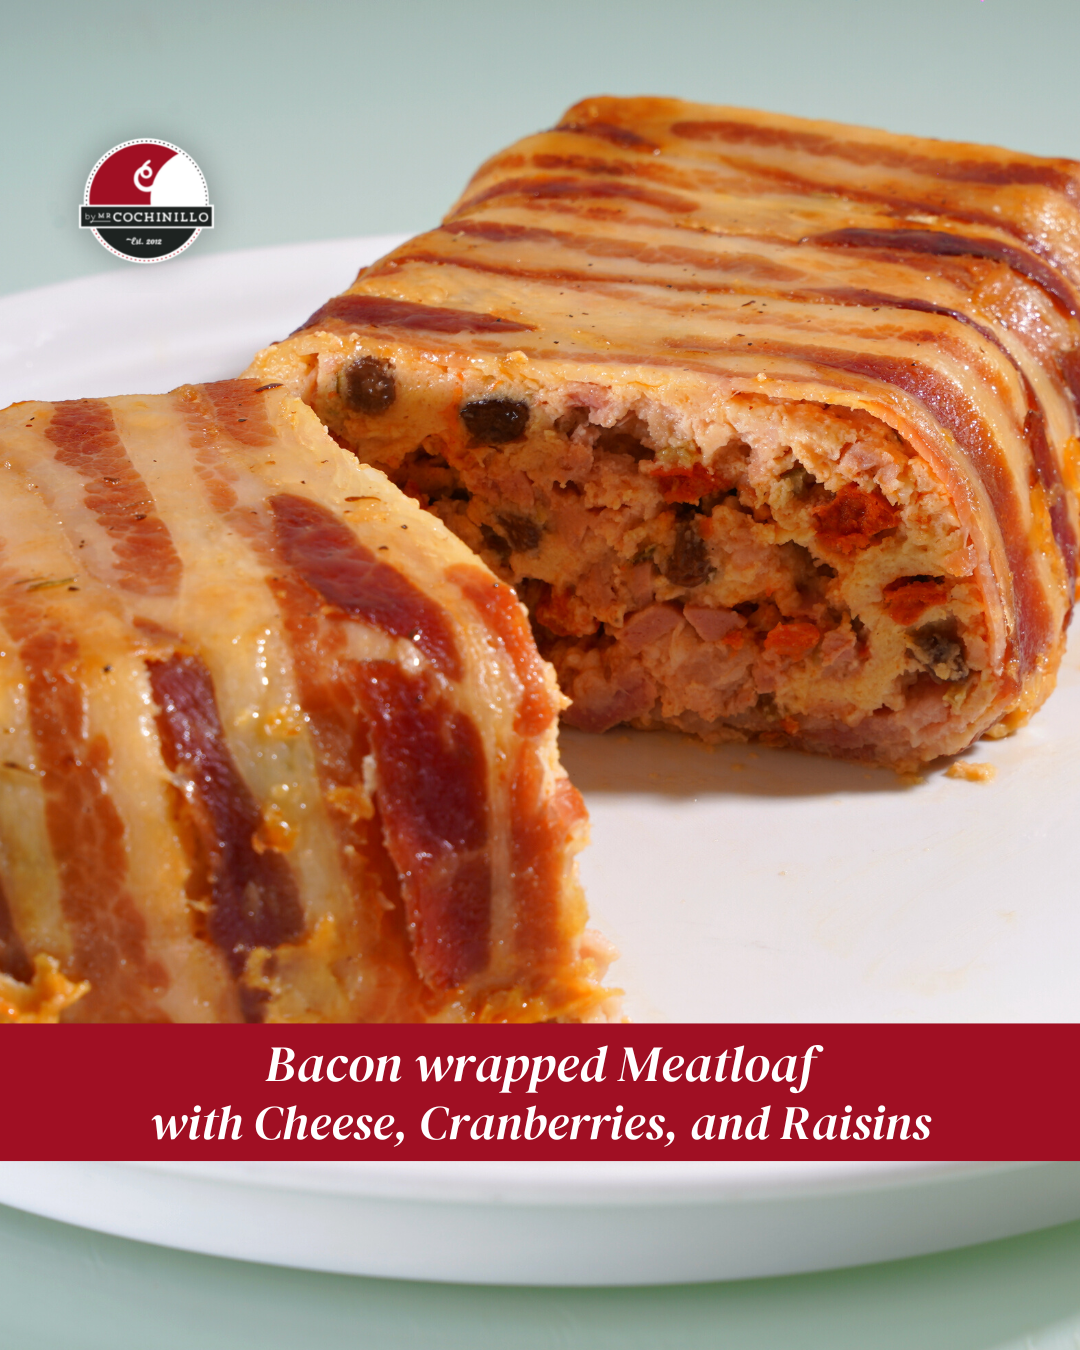 Bacon Wrapped Meatloaf with Cheese, Cranberries, and Raisins